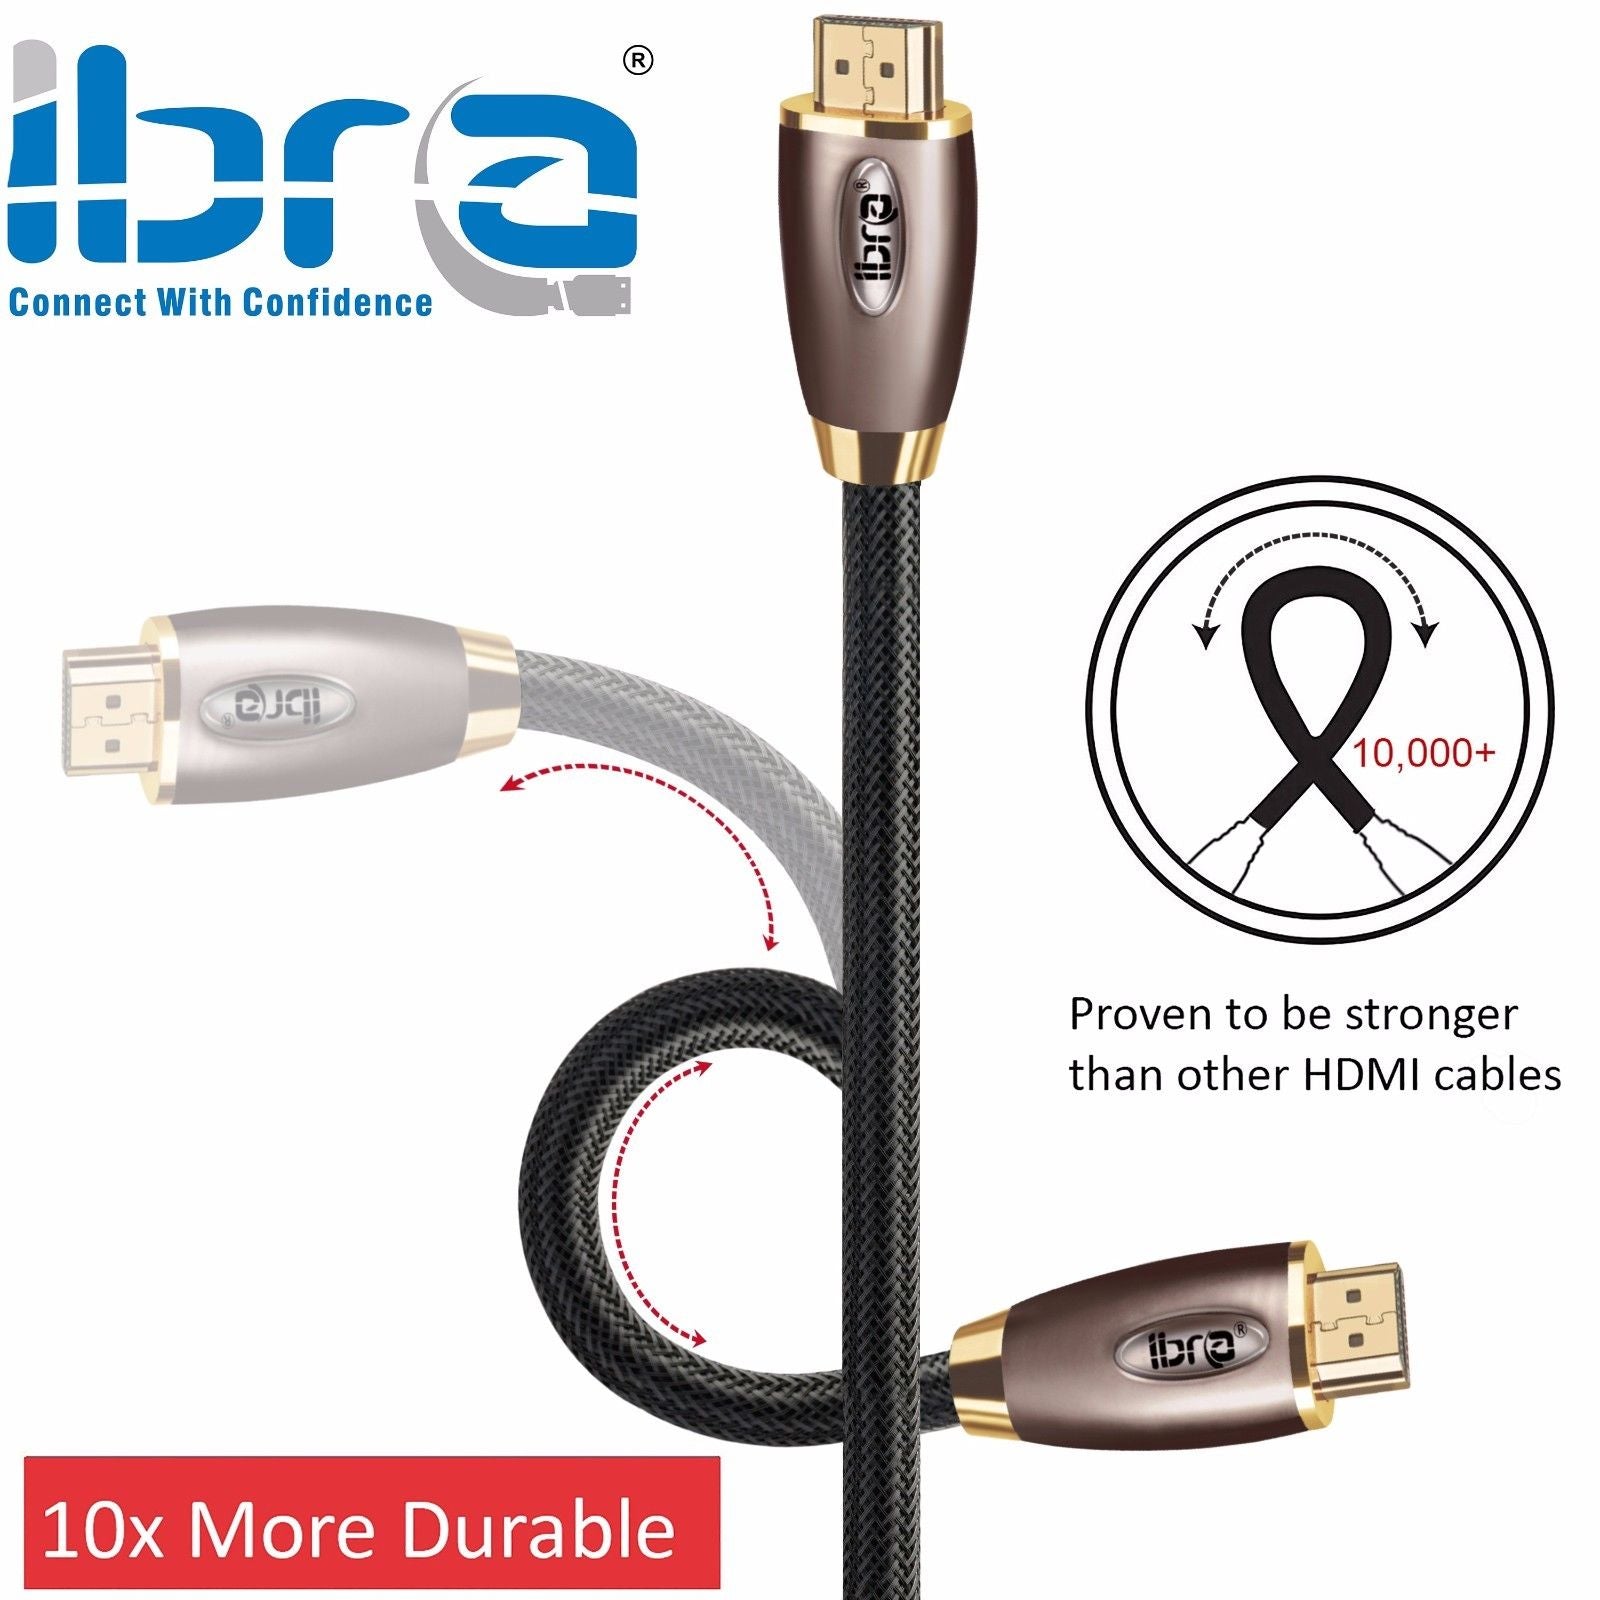 USB-C to HDMI adapter & cable - 2m - Supports resolutions up to 4K/2160p at  60Hz